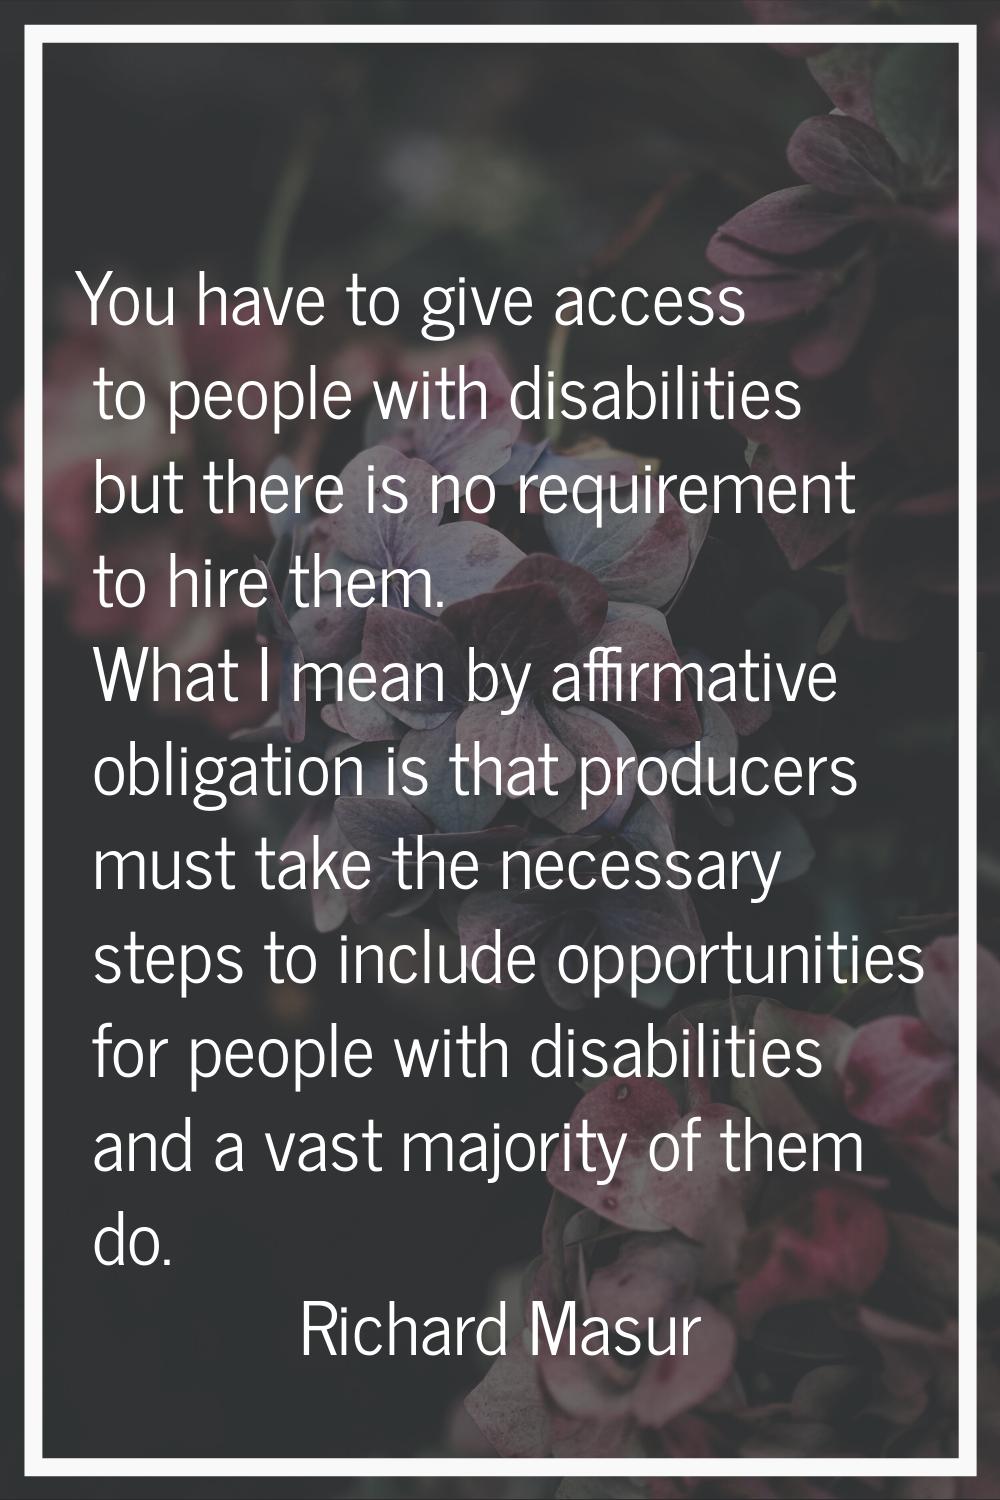 You have to give access to people with disabilities but there is no requirement to hire them. What 